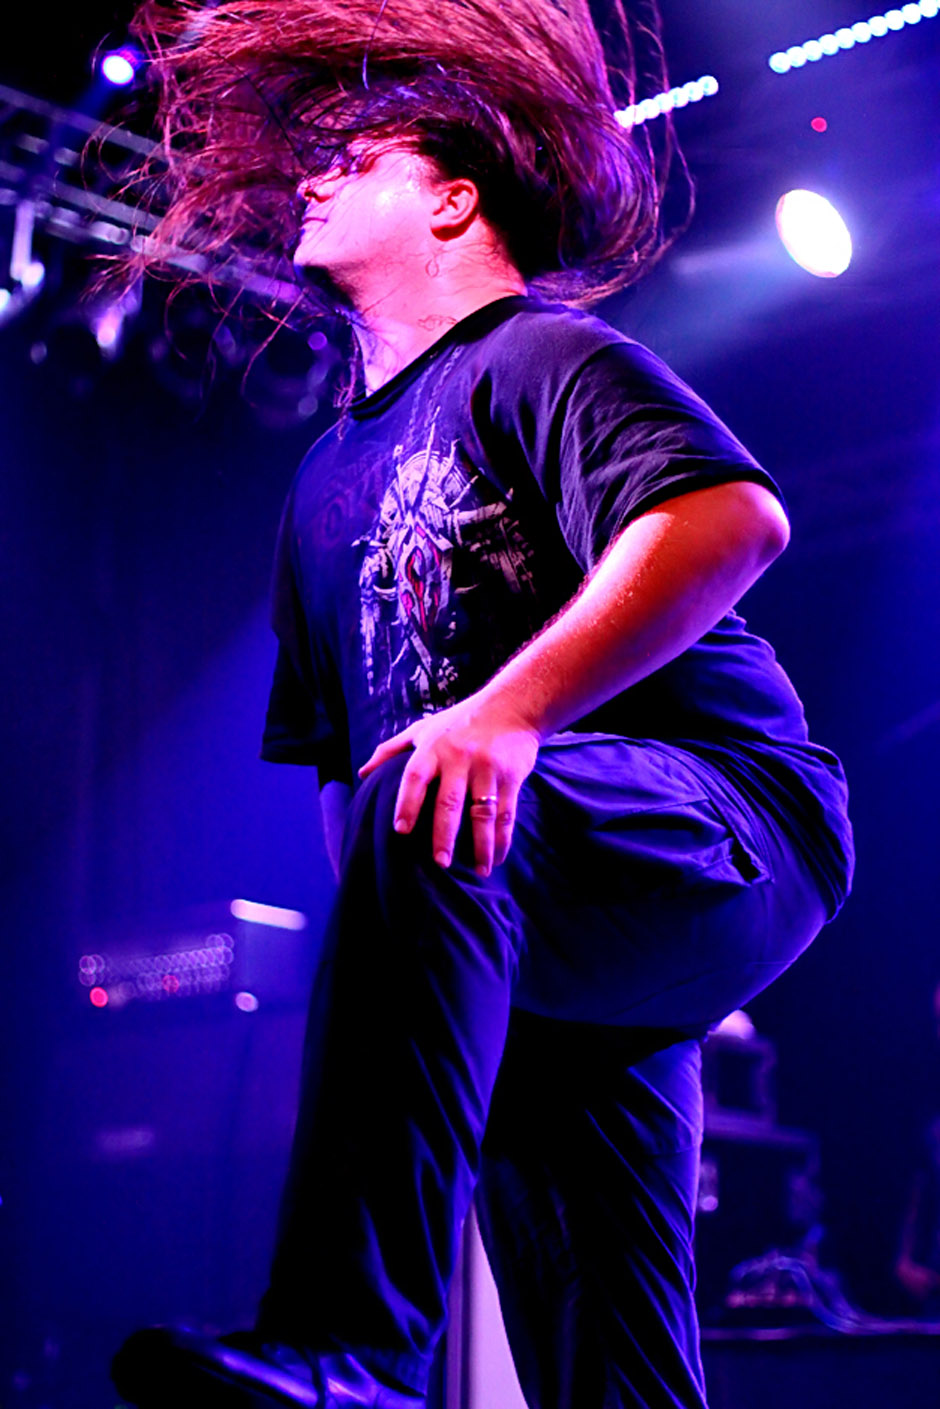 Cannibal Corpse live, 22.02.2013, Geiselwind, Music Hall